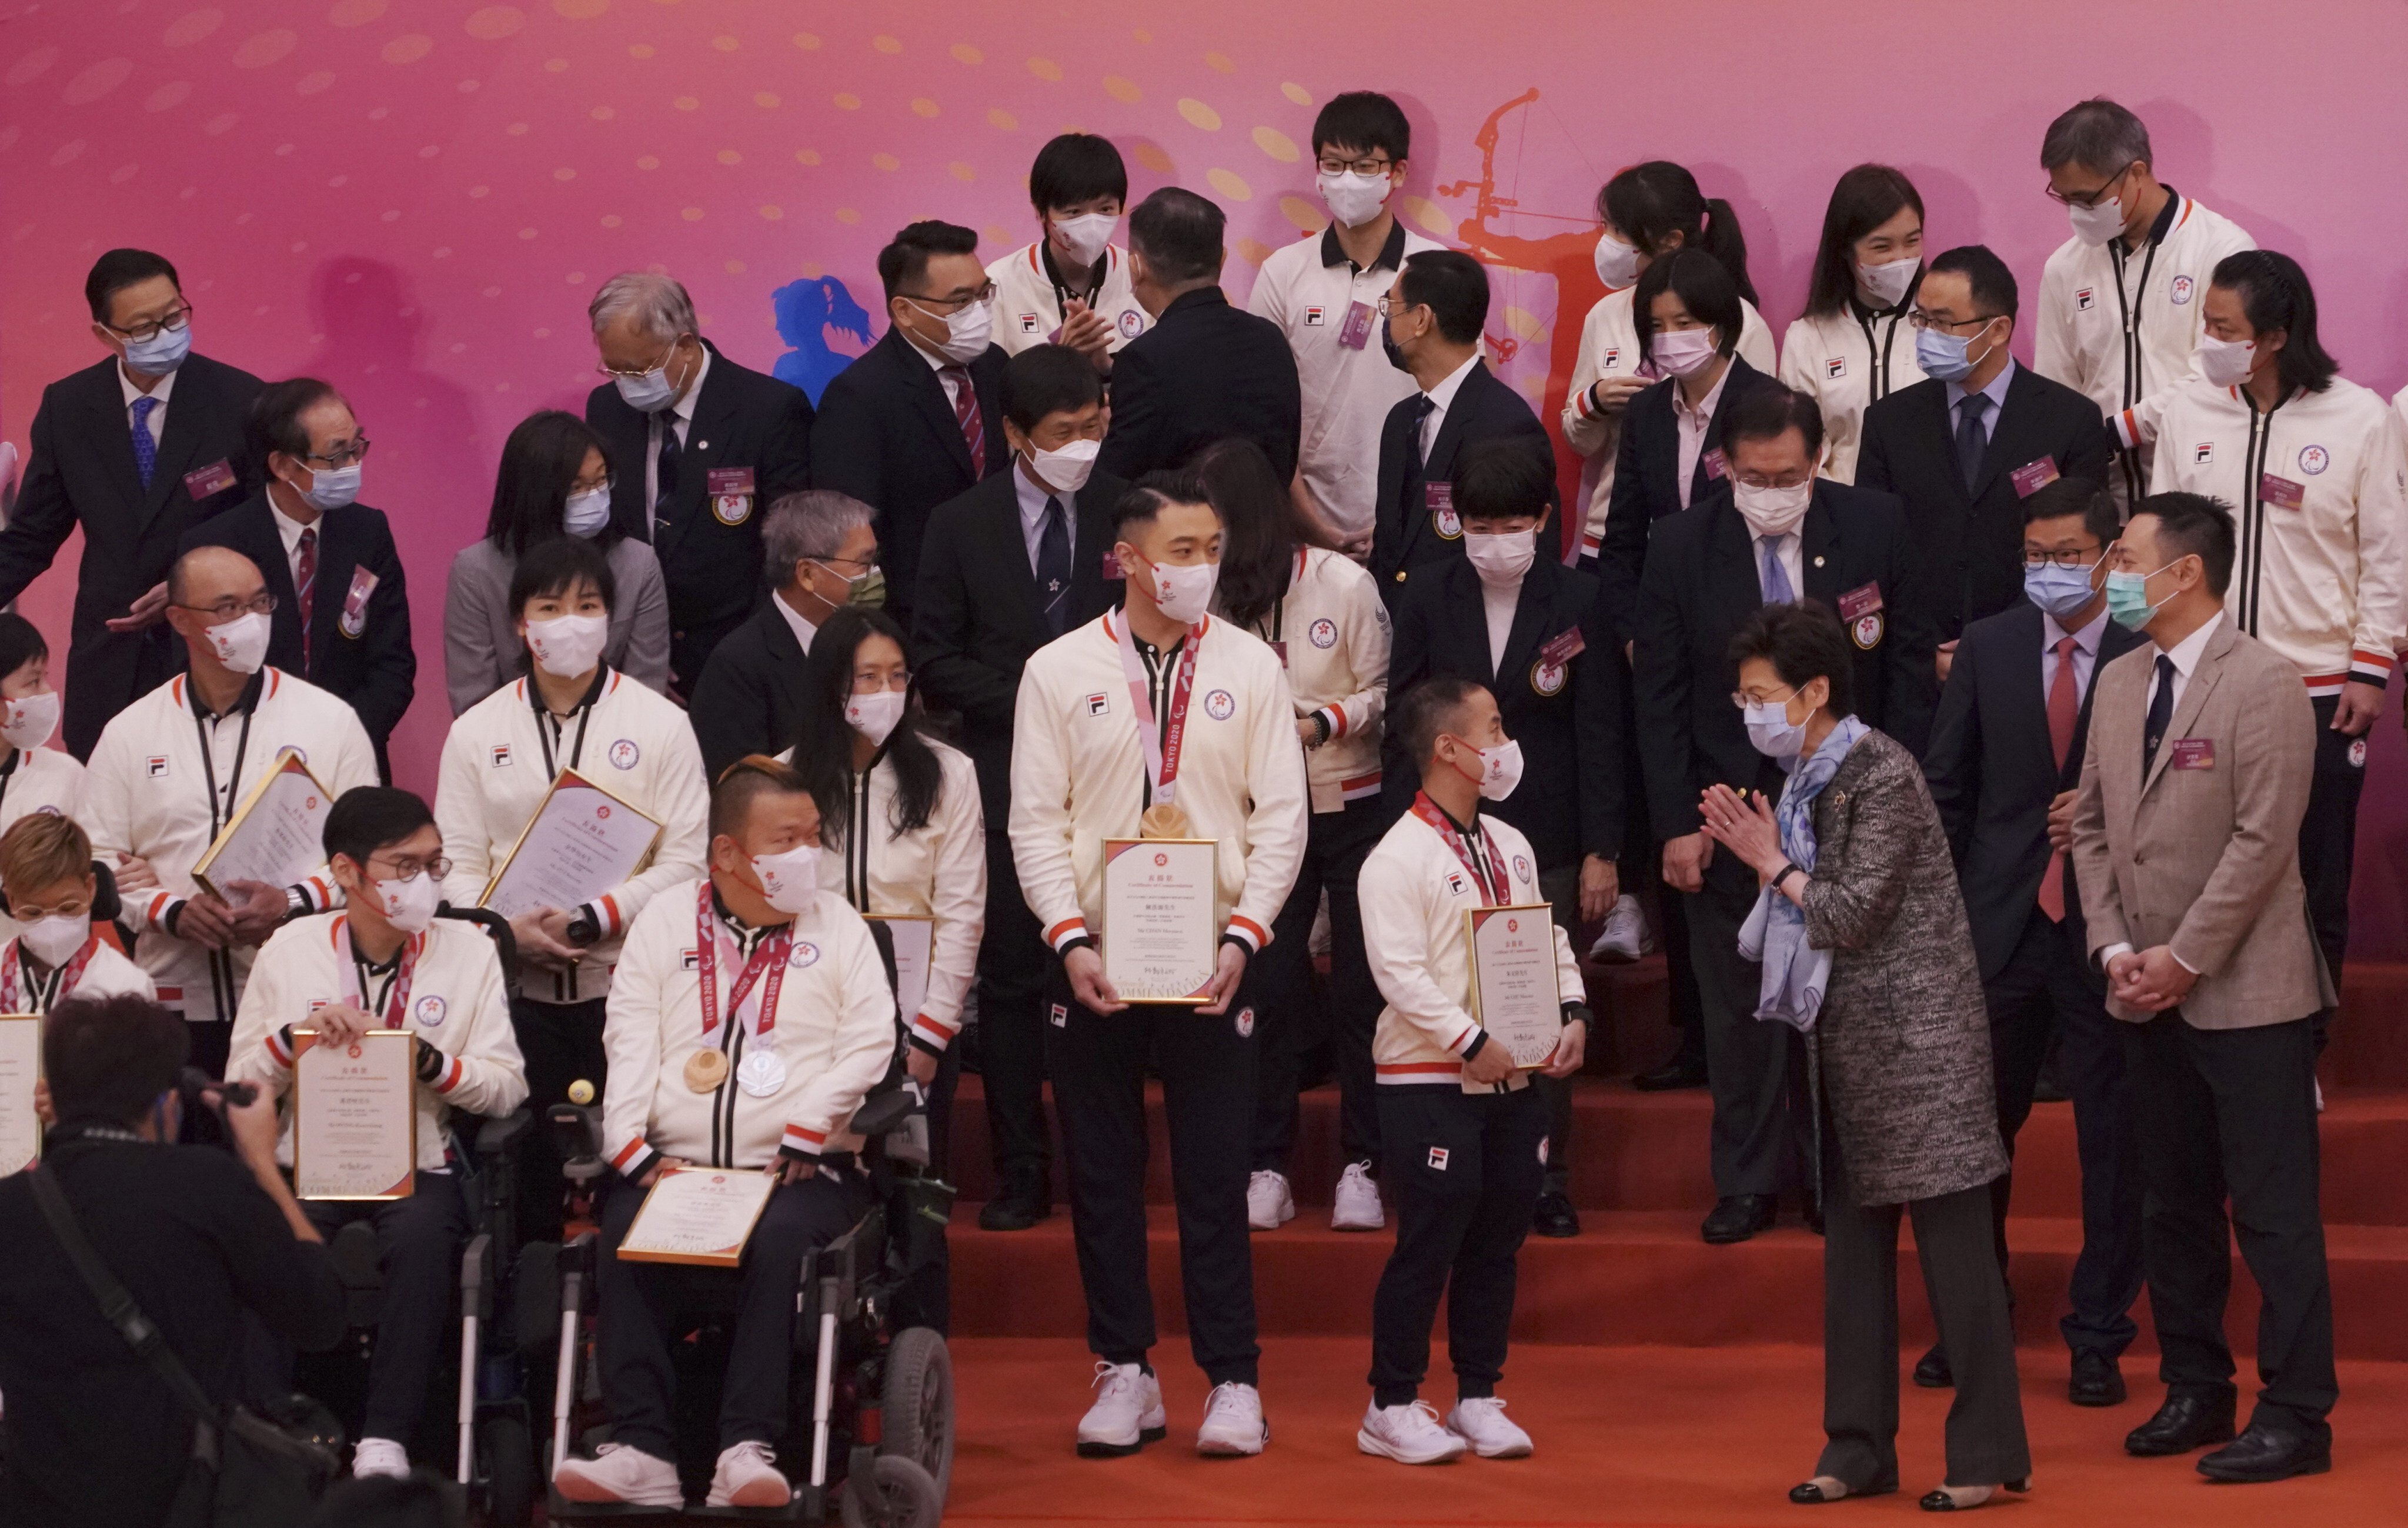 The welcome-home ceremony for Hong Kong’s Paralympic delegation in Ma On Shan Sports Centre on October 18. Beyond the fanfare, Hong Kong must commit to advancing the rights and well-being of its disabled citizens. Photo: Felix Wong